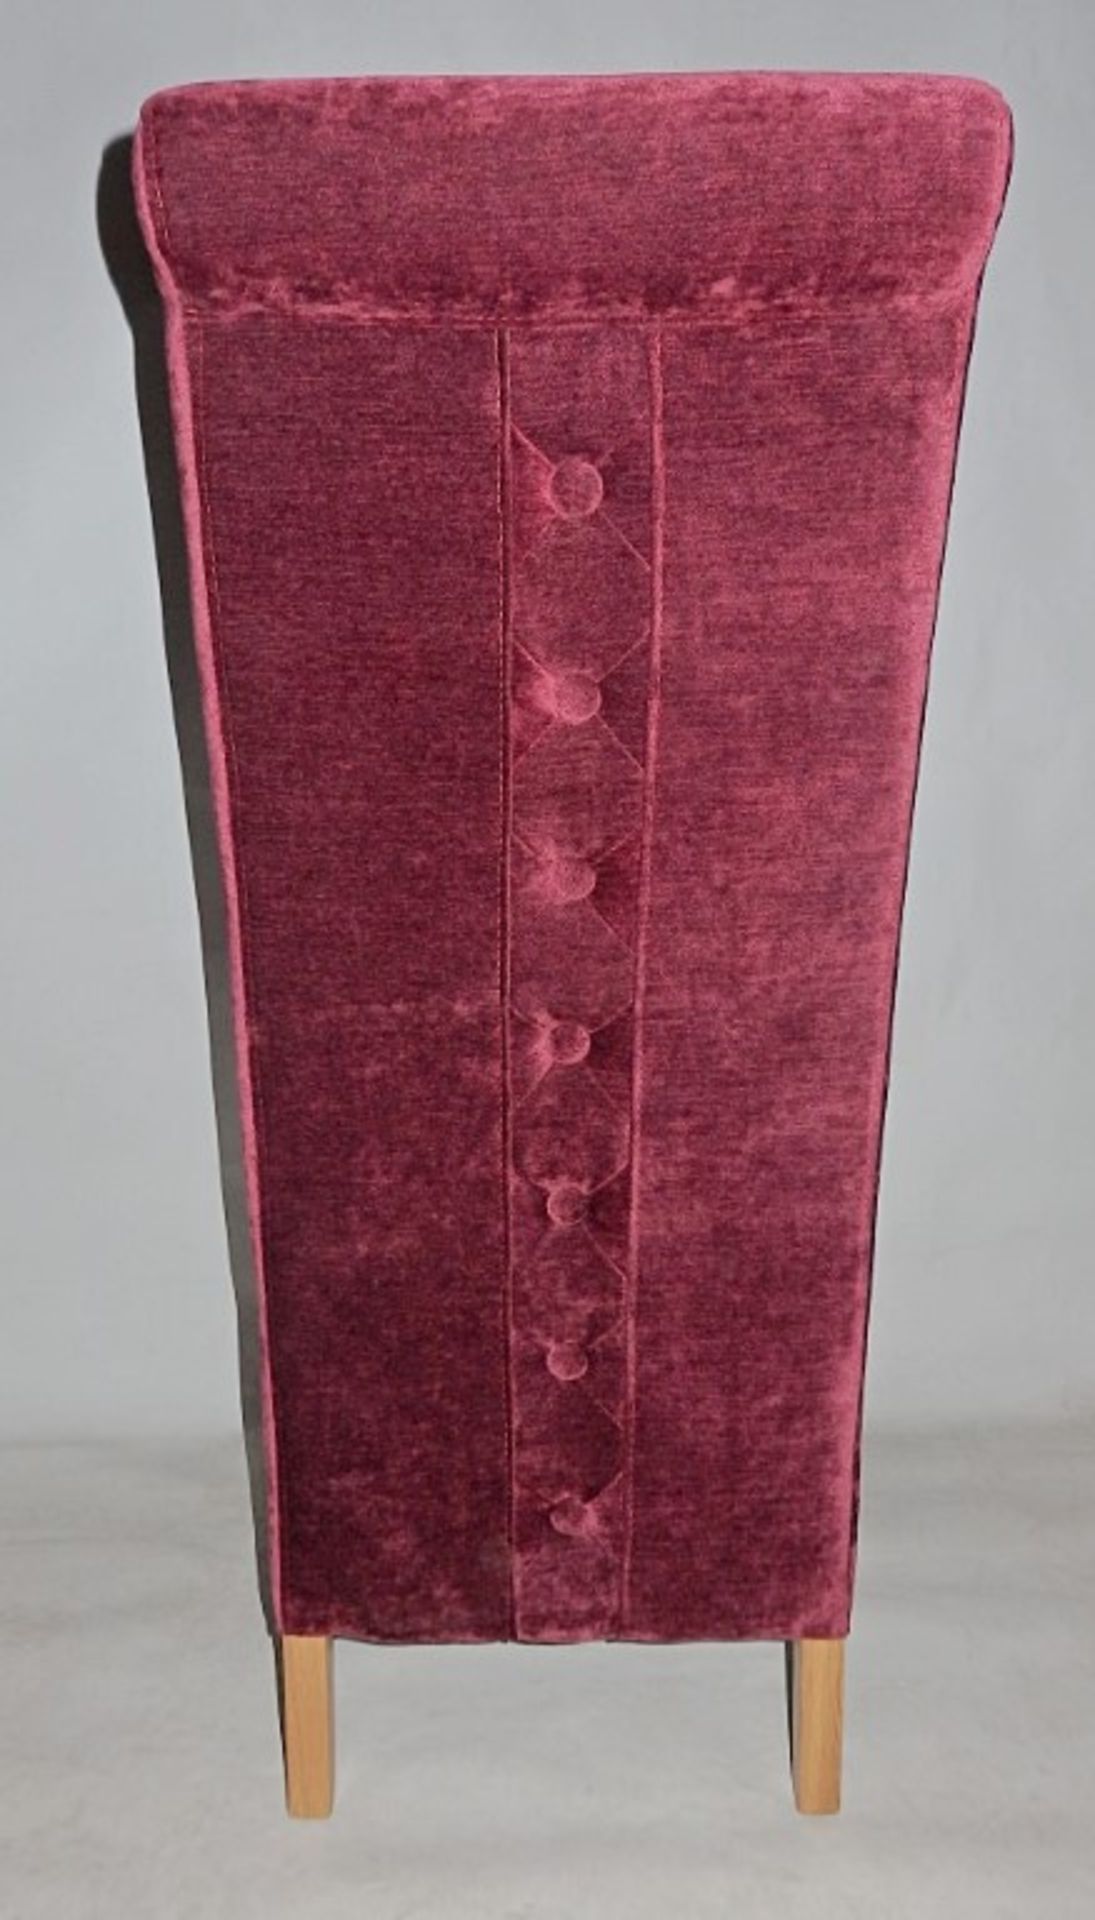 1 x Handcrafted High-back Dining Chair, Finished In A Rich Burgundy Chenille - Built & Upholstered - Image 4 of 4